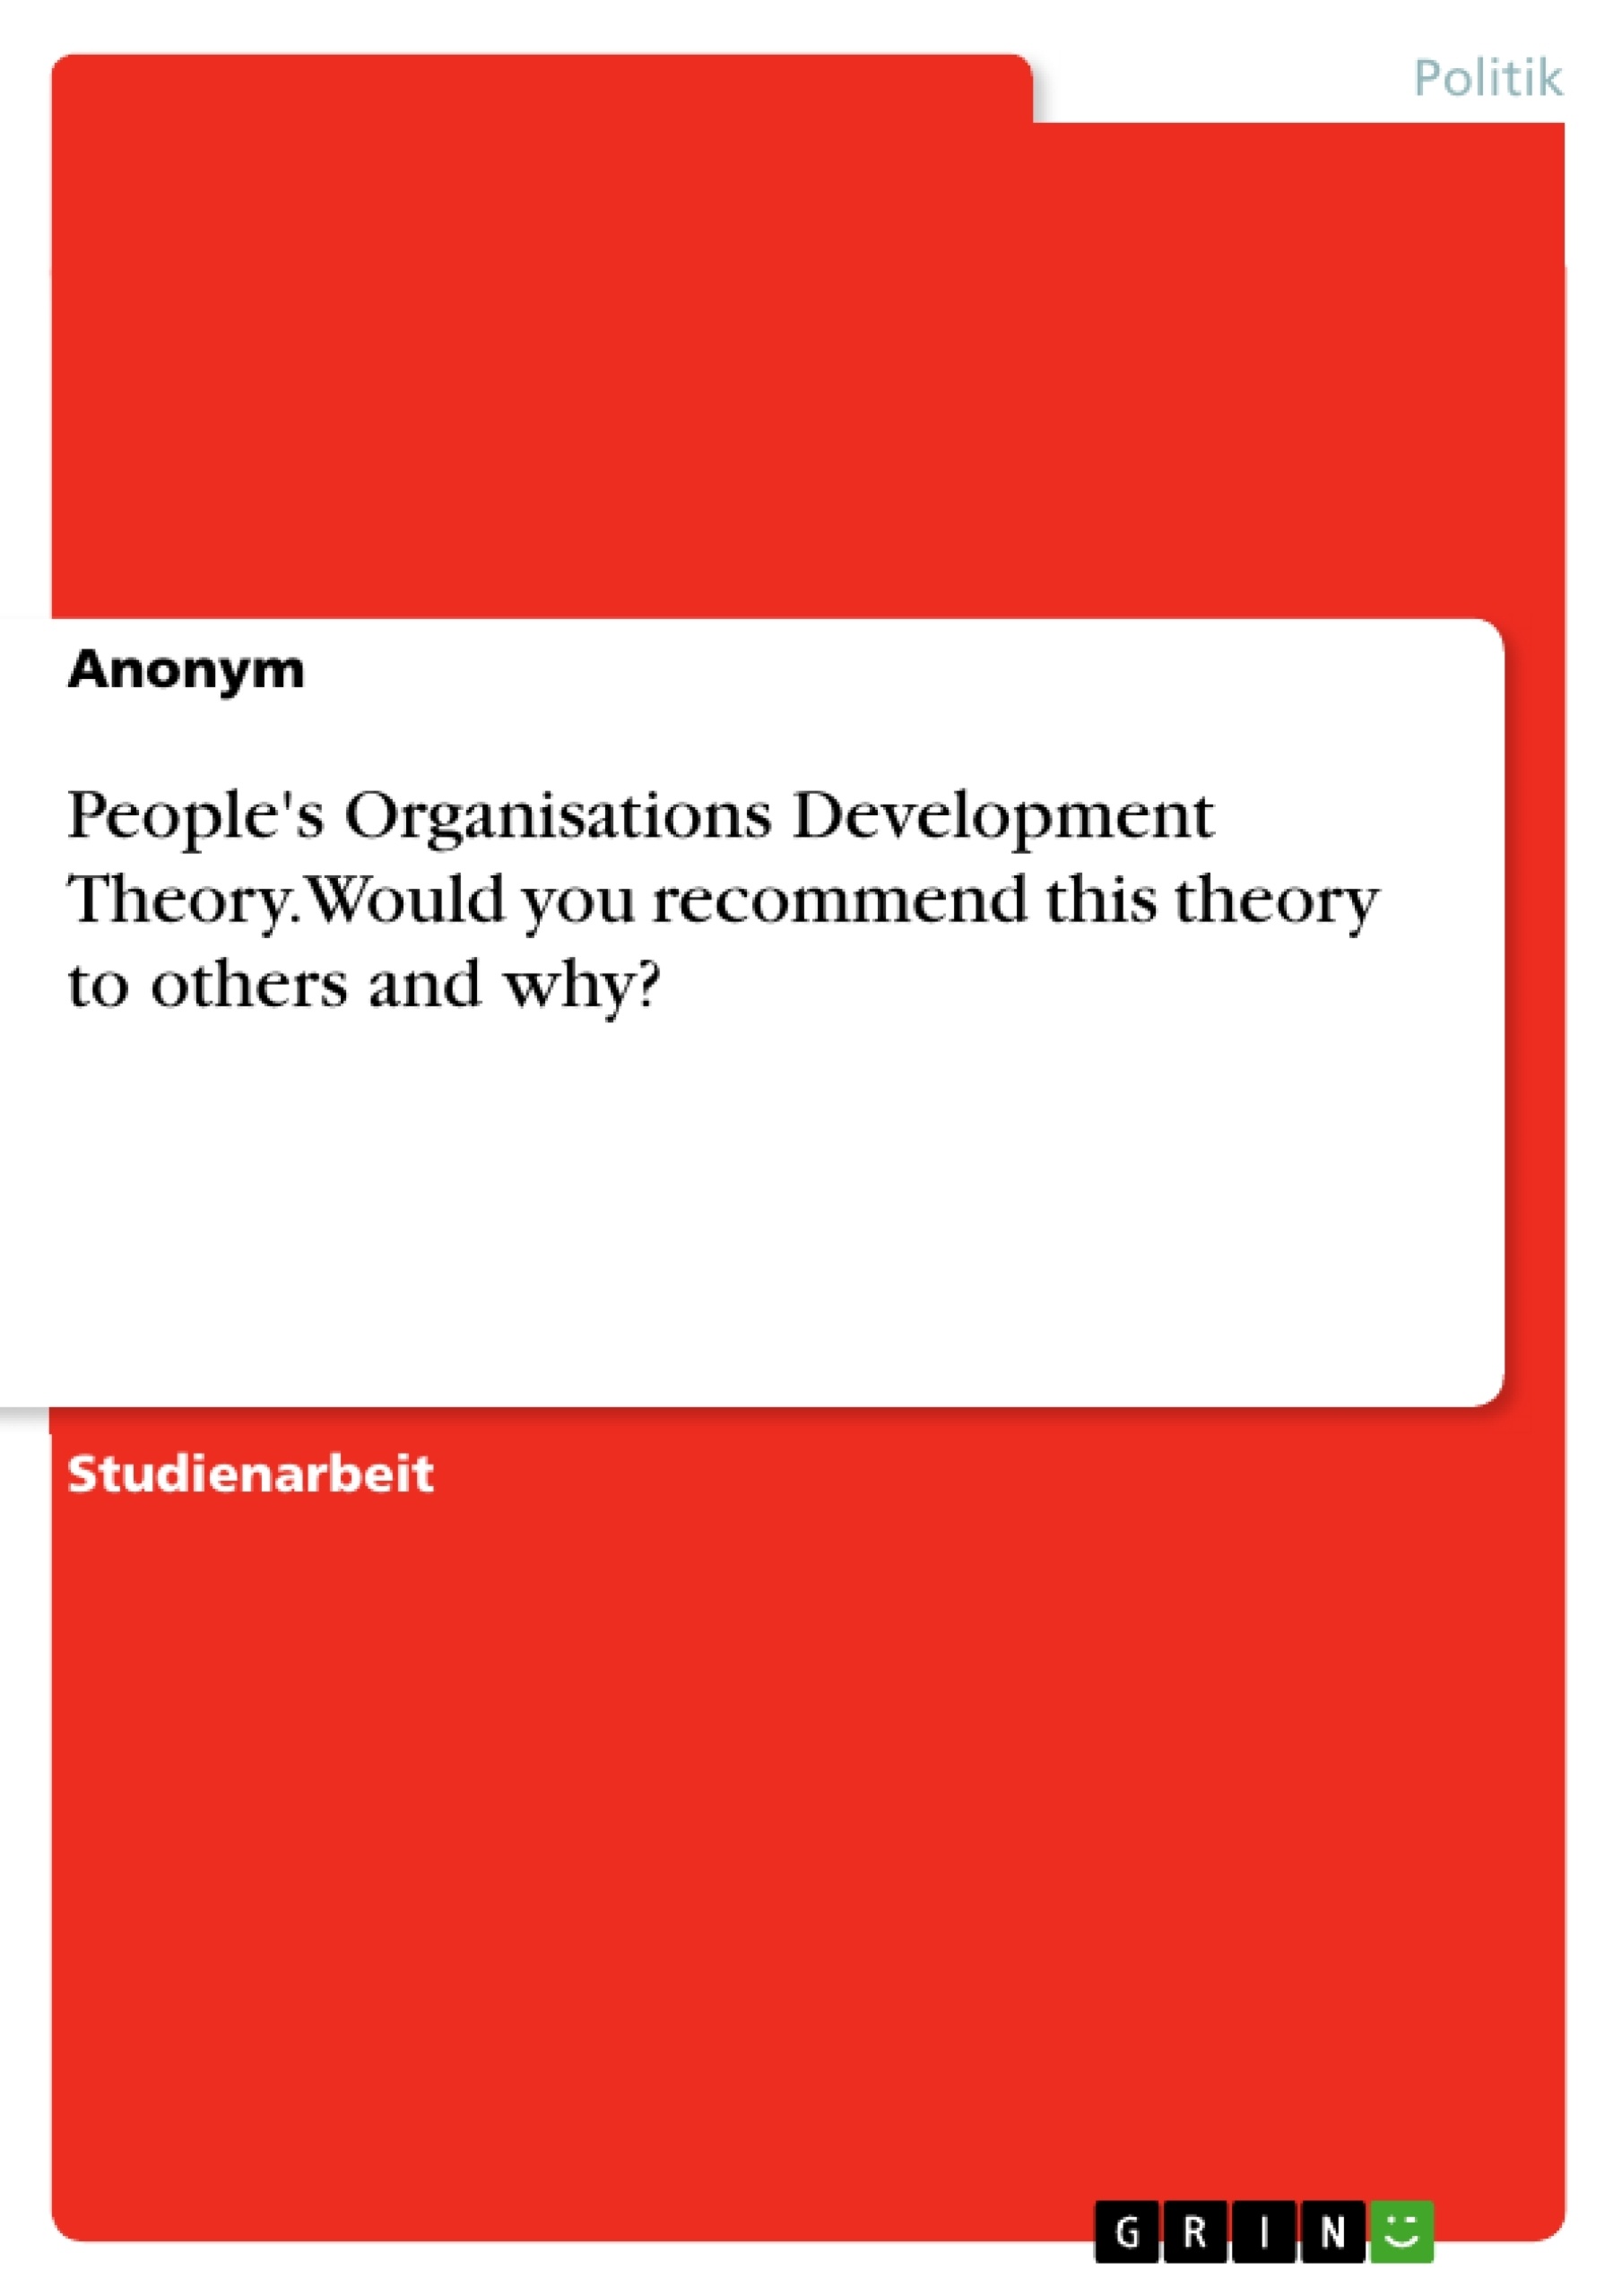 Titel: People's Organisations Development Theory. Would you recommend this theory to others and why?